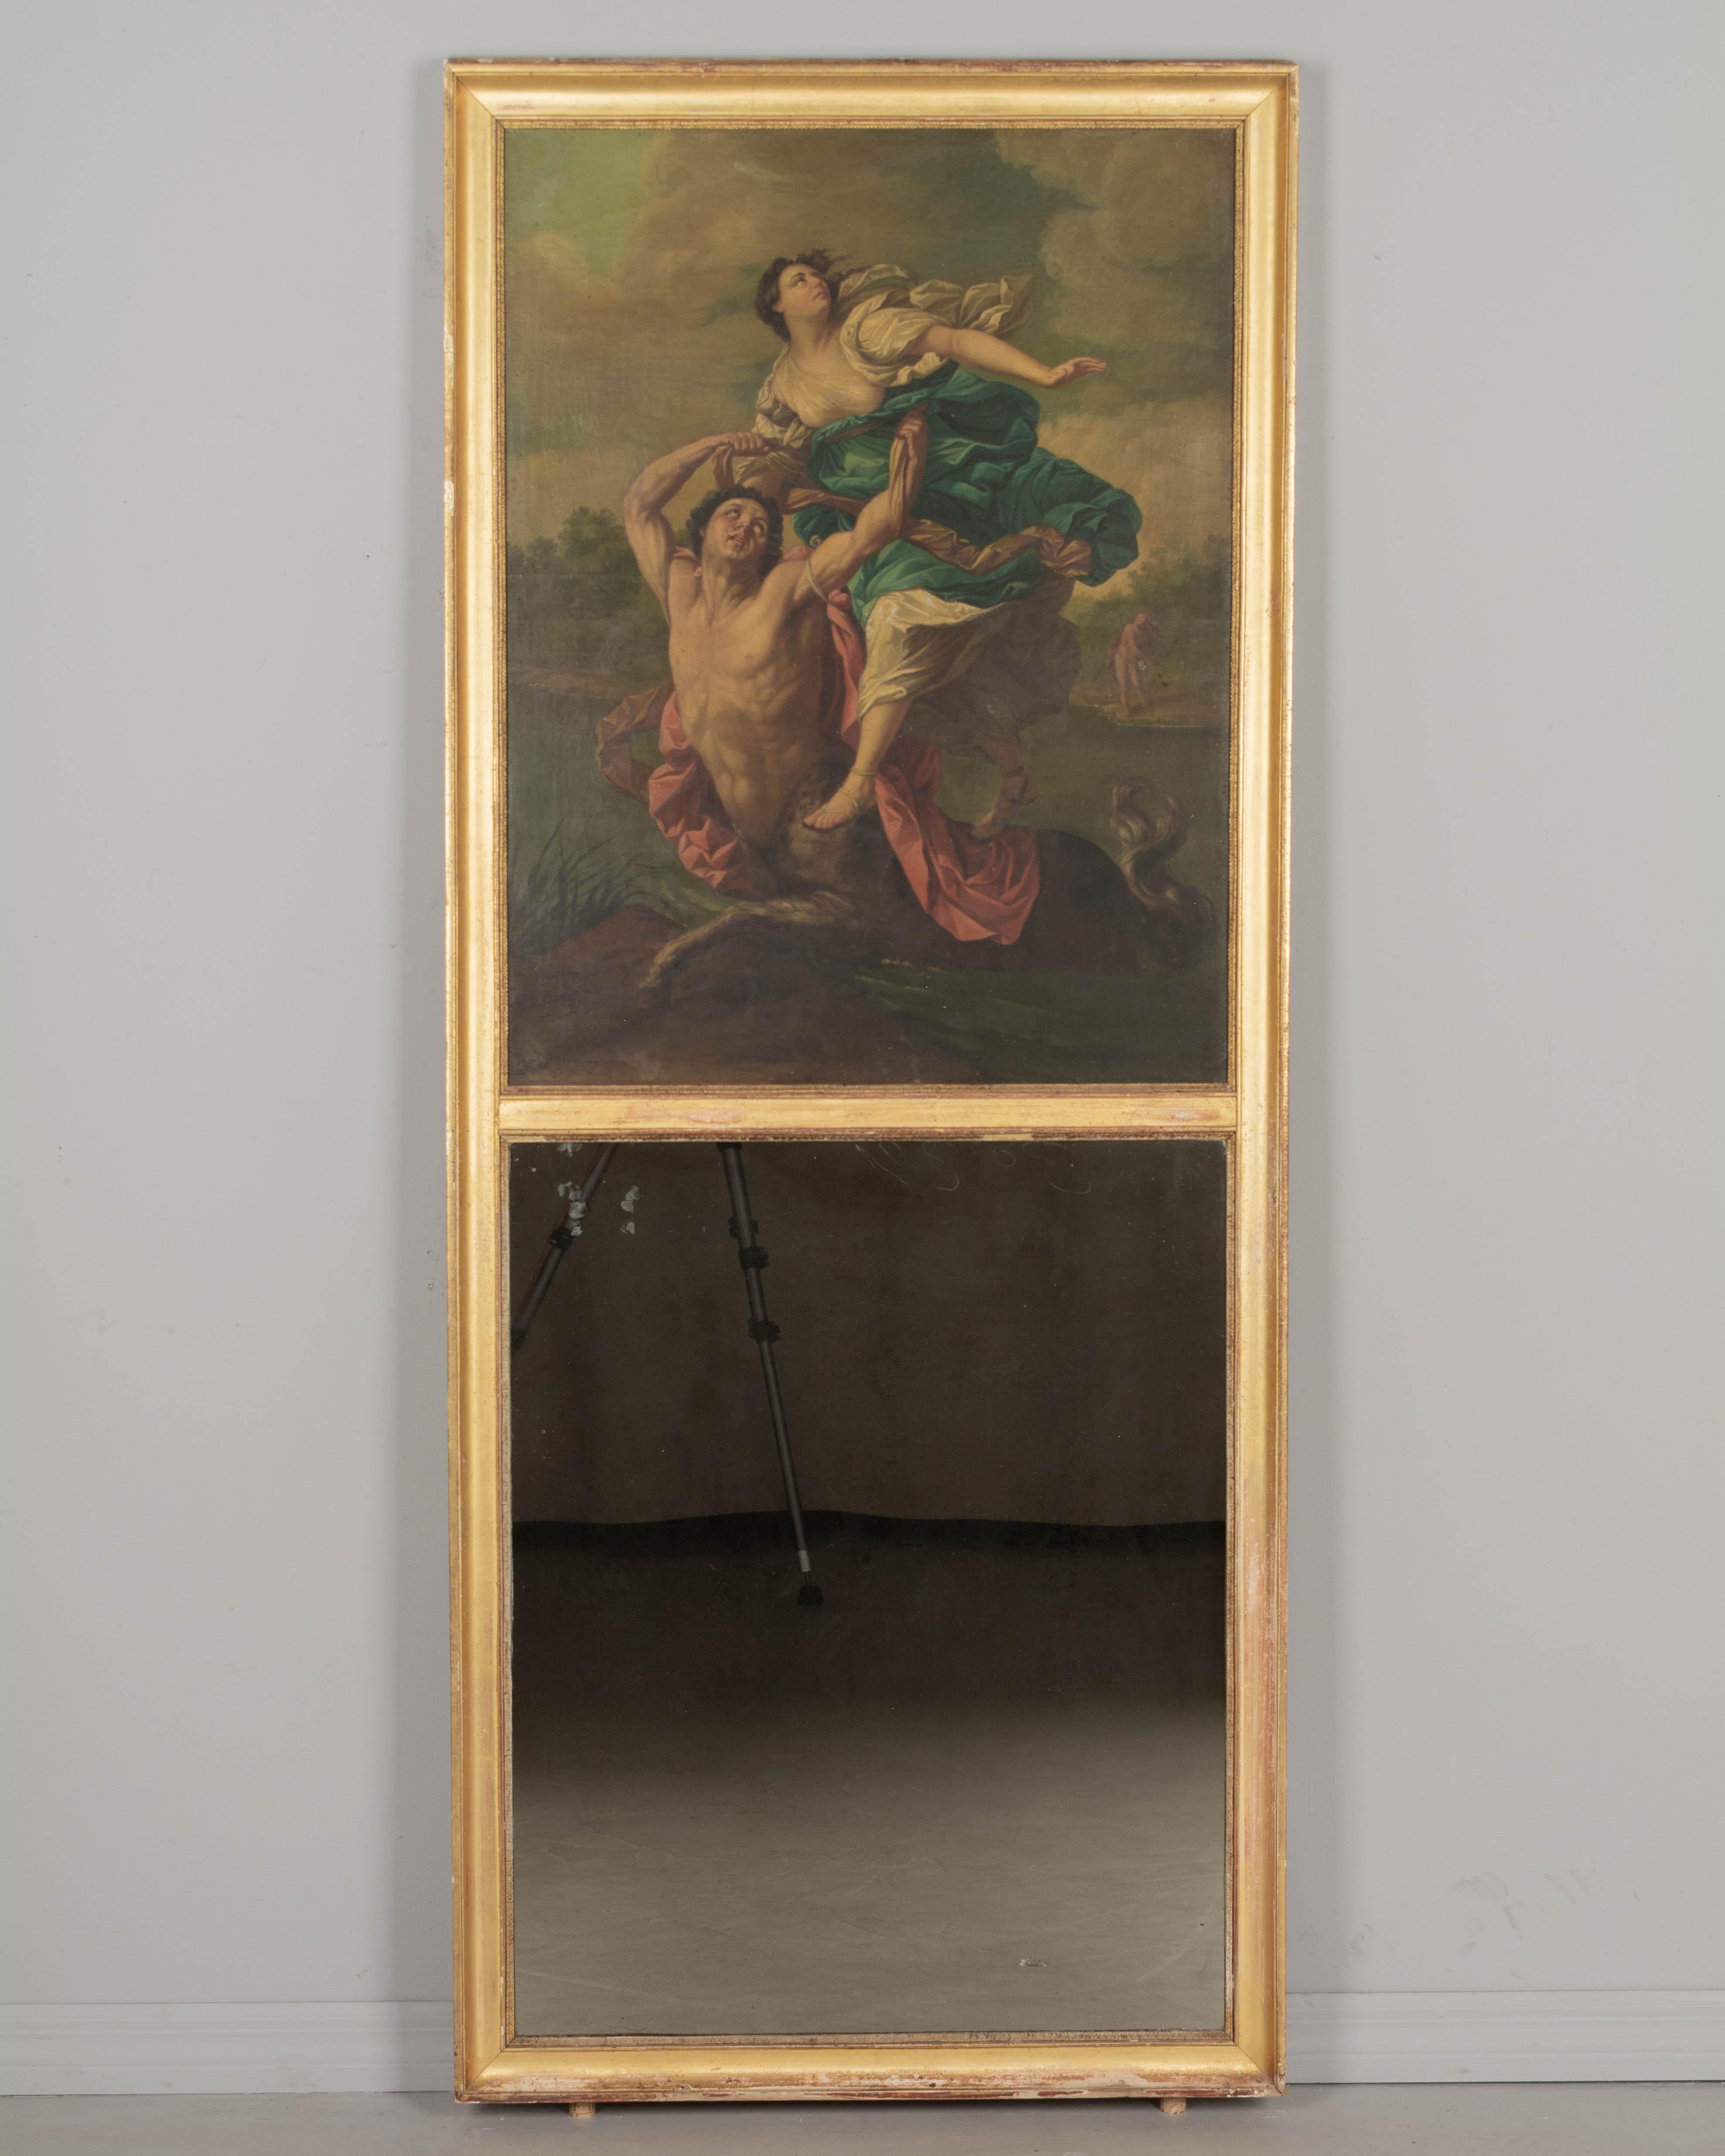 An 18th century French Louis XVI style trumeau mirror with a large oil painting depicting The Abduction of Deianira after Guido Reni. Gilded wood frame with bright gilt finish is in good condition with small losses along bottom edge and minor